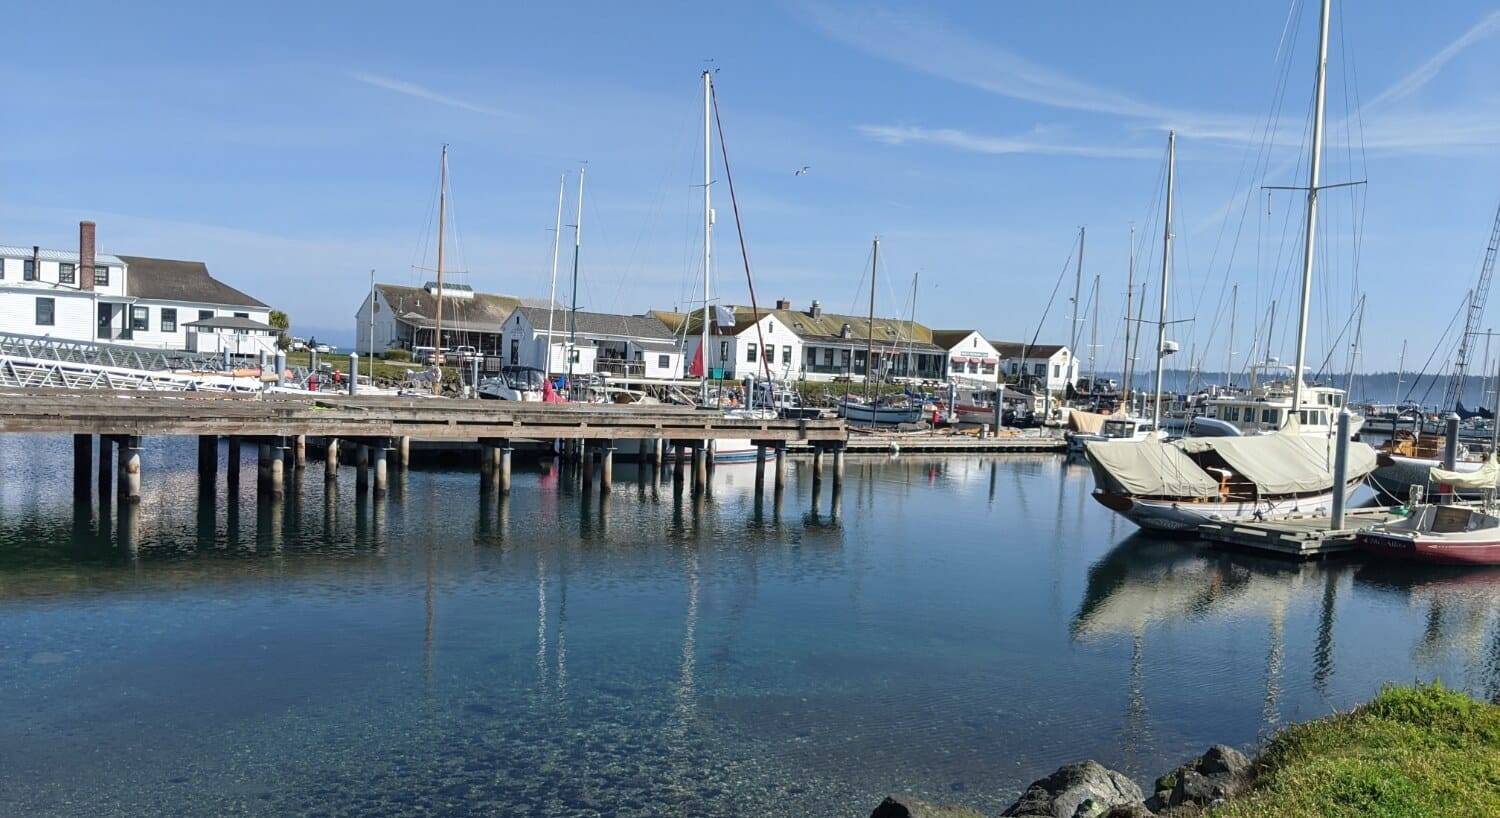 A port and dock with numerous sailboats in the water and buildings in the background.